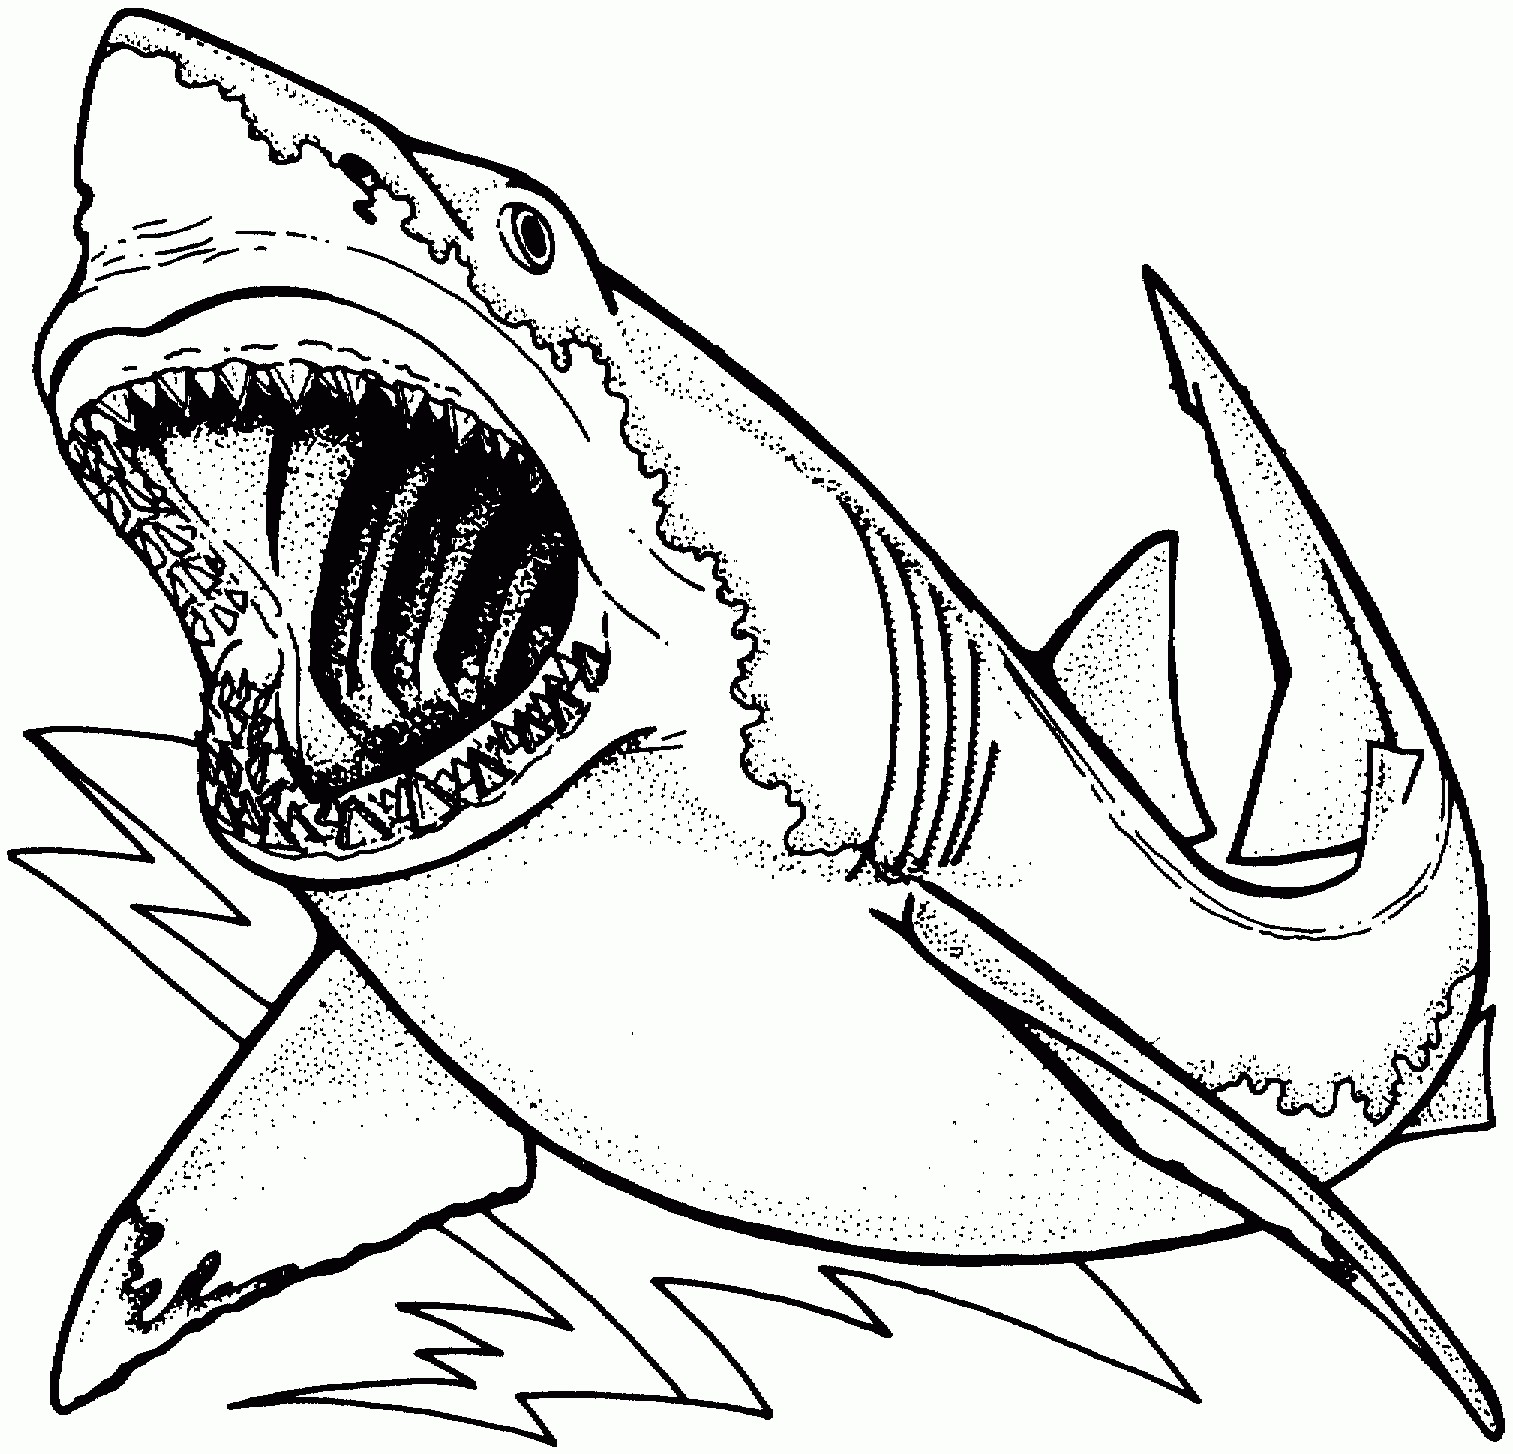 King Shark Colouring Pages - GBRgot1